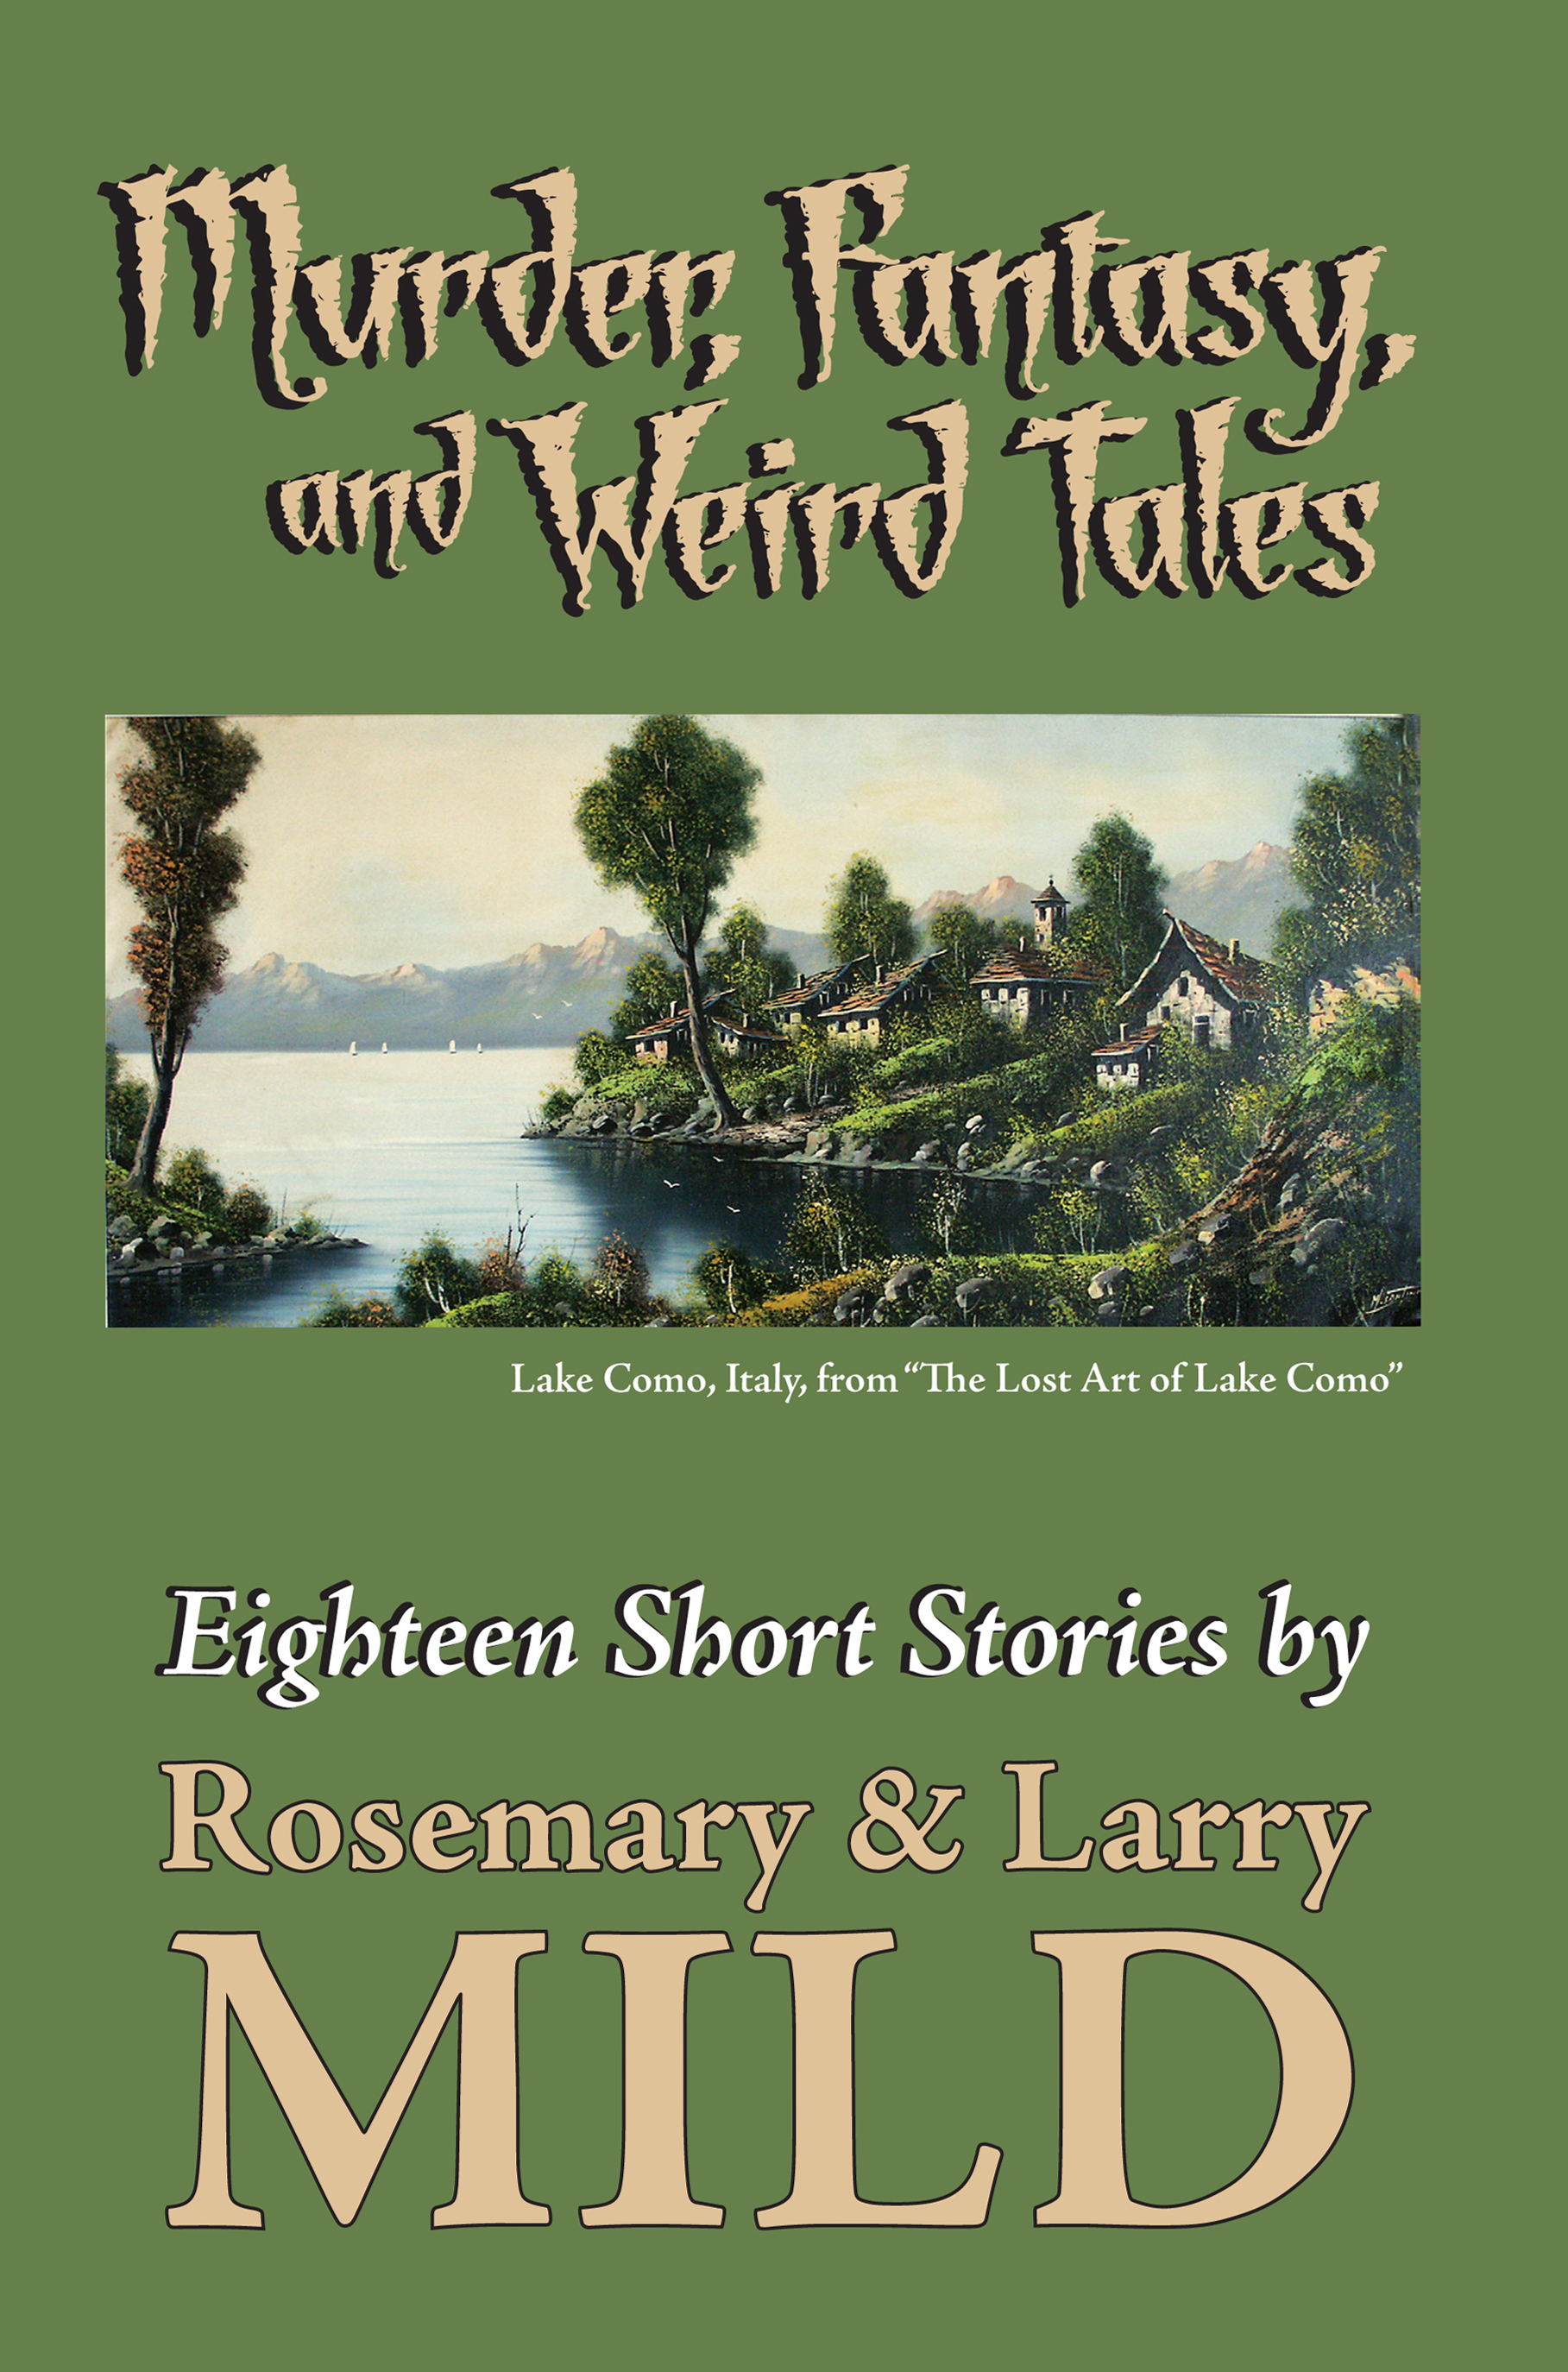 Murder, Fantasy, and Weird Tales by Larry and Rosemary Mild